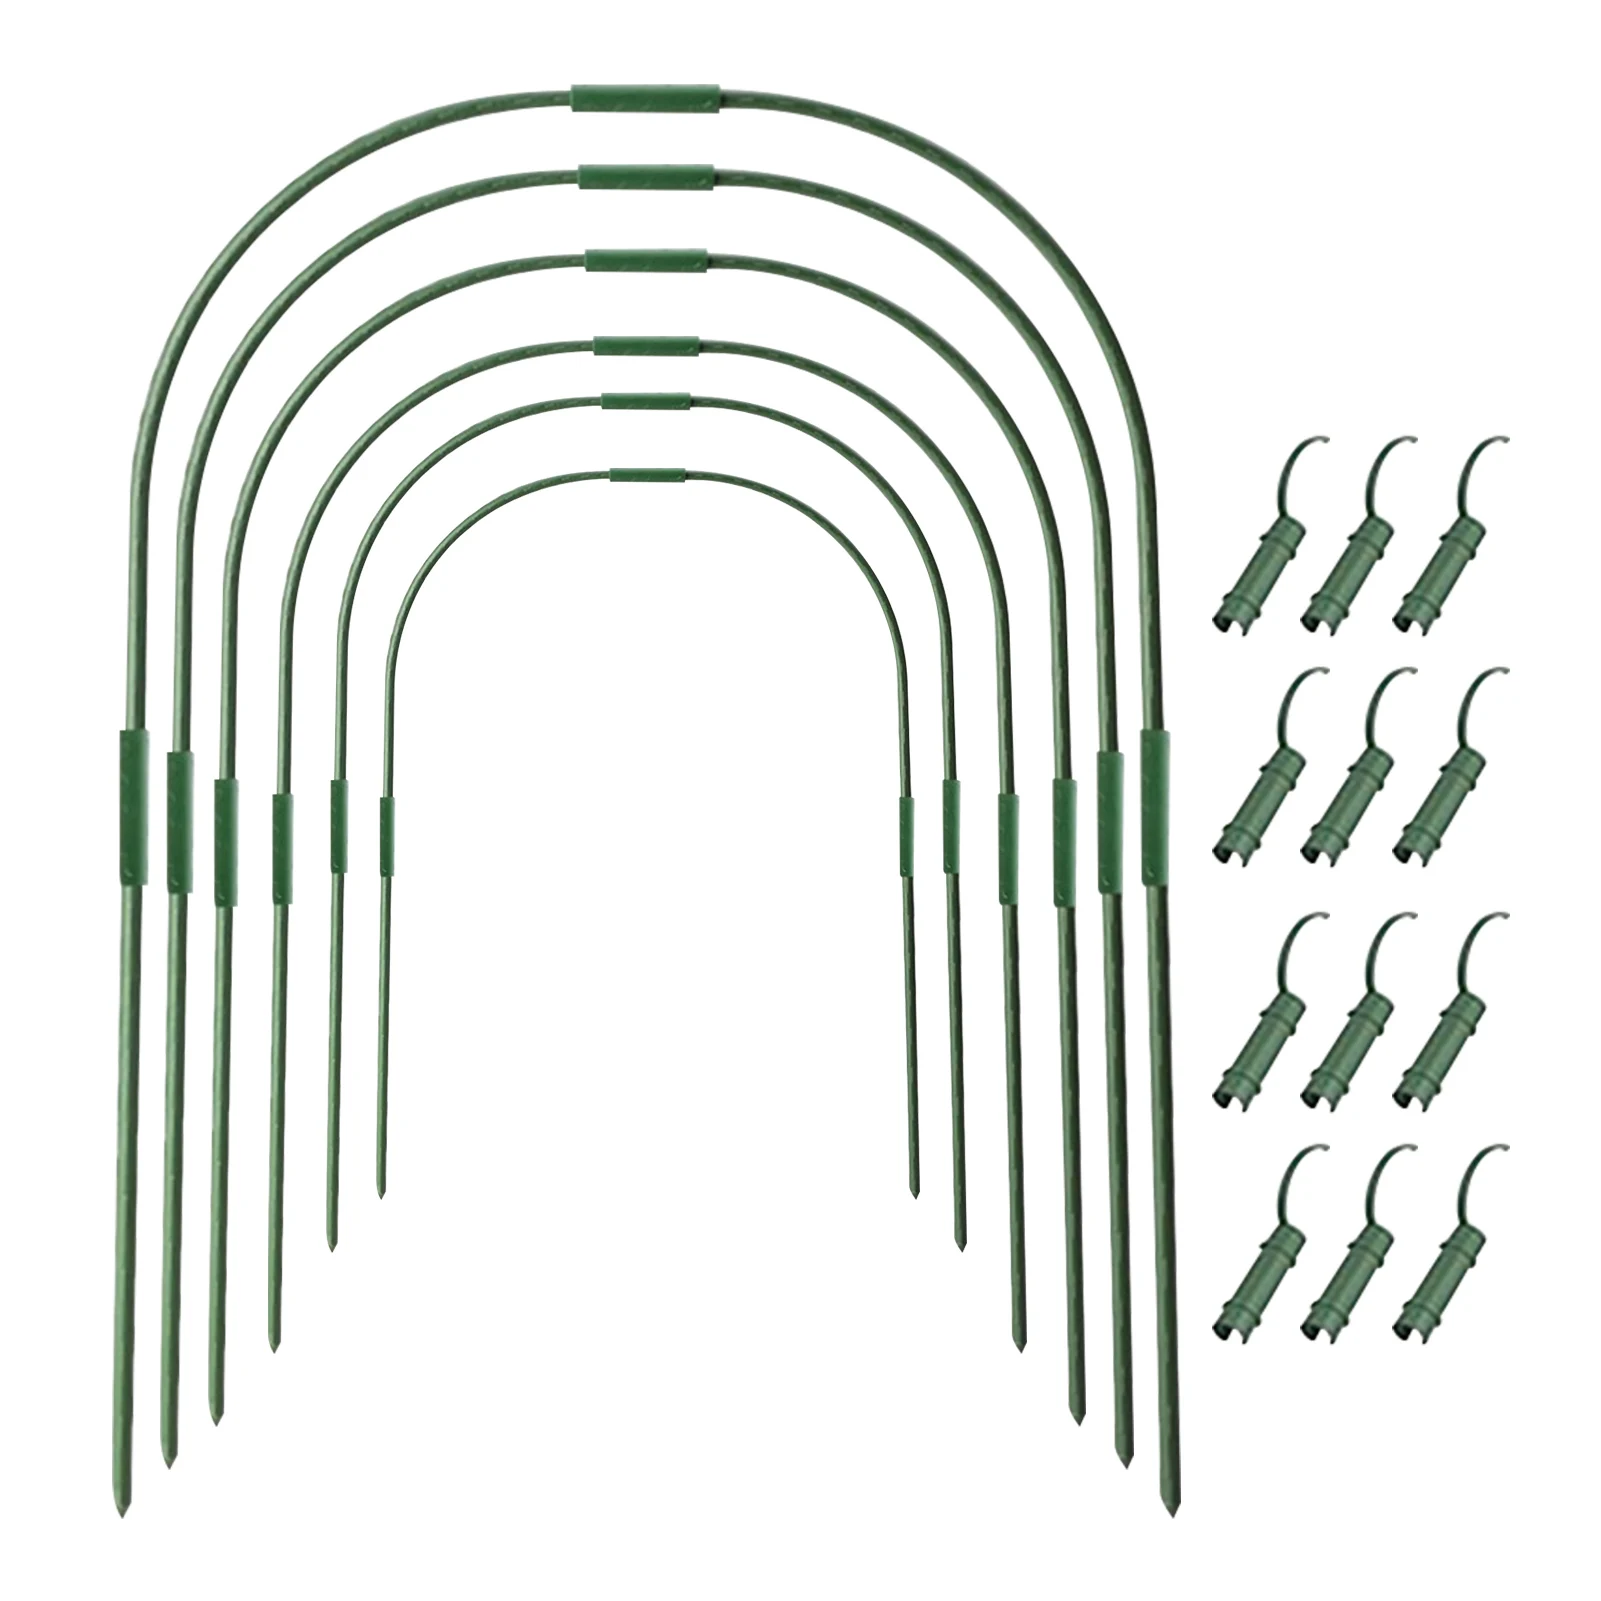 

54pcs Protective Garden Frame Stakes Steel Row Cover Clip Vegetable DIY Plant Support Sturdy Growing Tunnel Greenhouse Hoop Set